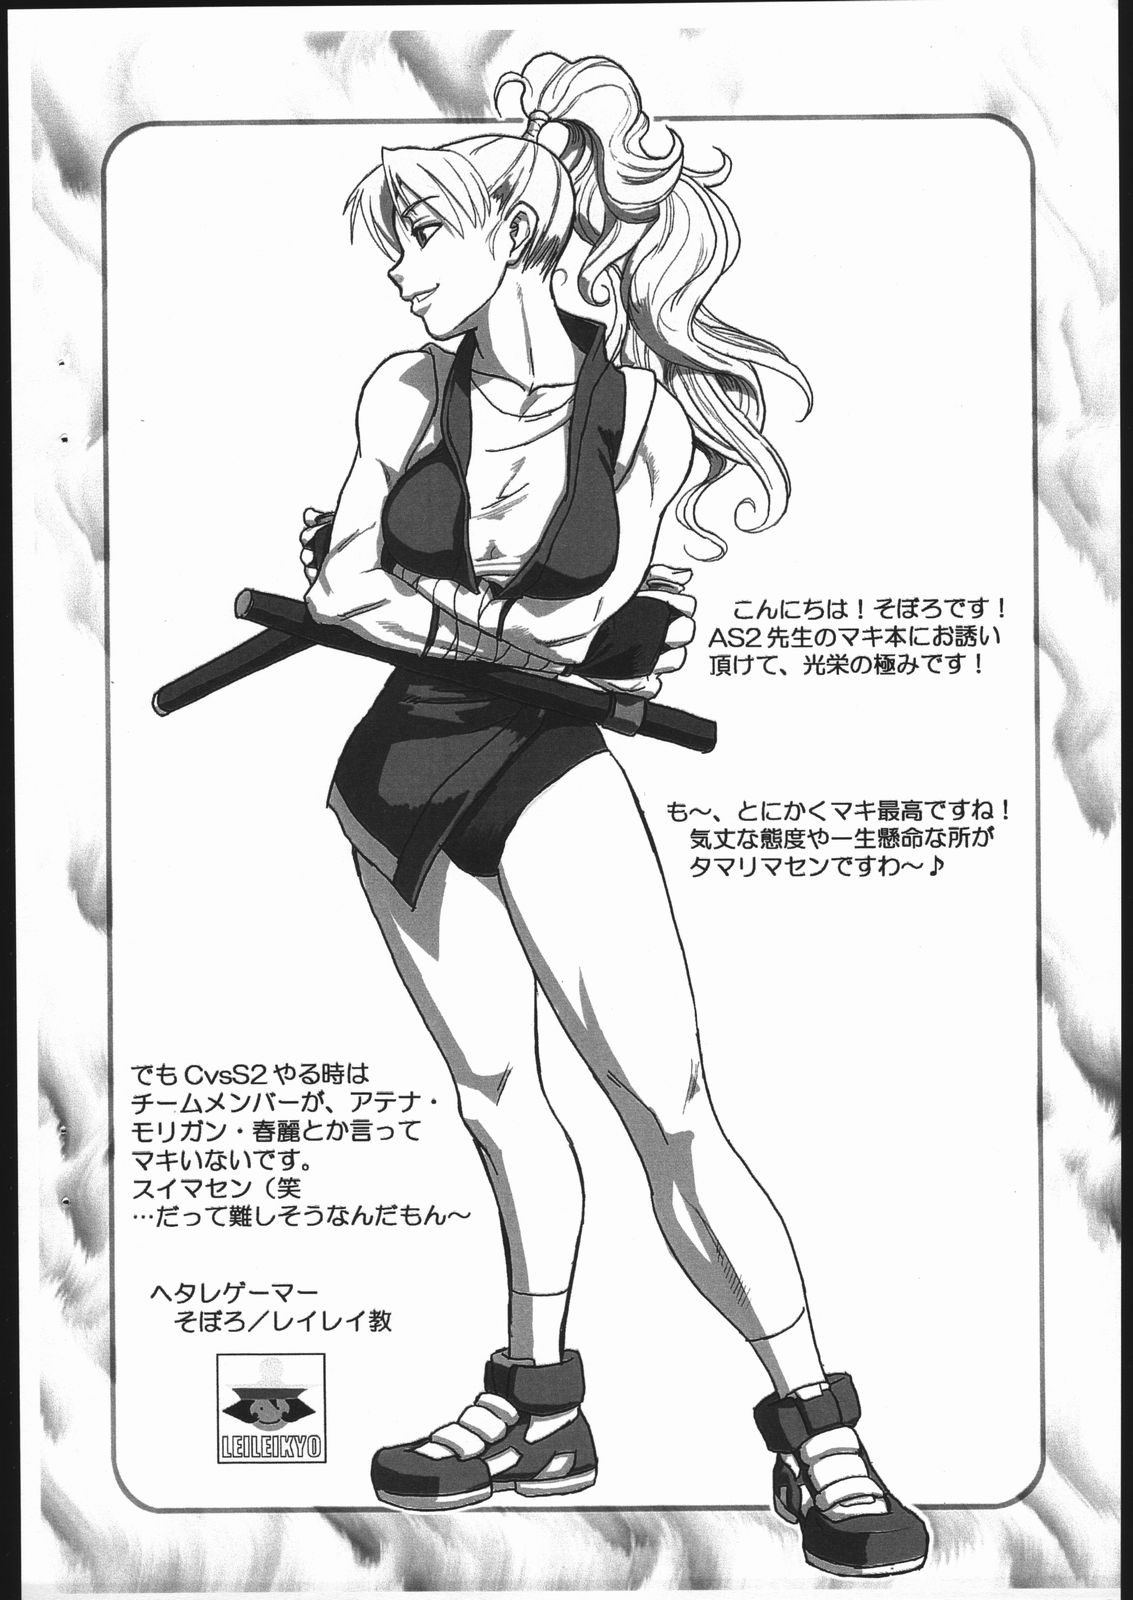 (C62) [Mushimusume Aikoukai (ASTROGUYII)] M&K Ver.2 (Street Fighter, King of Fighters) page 22 full